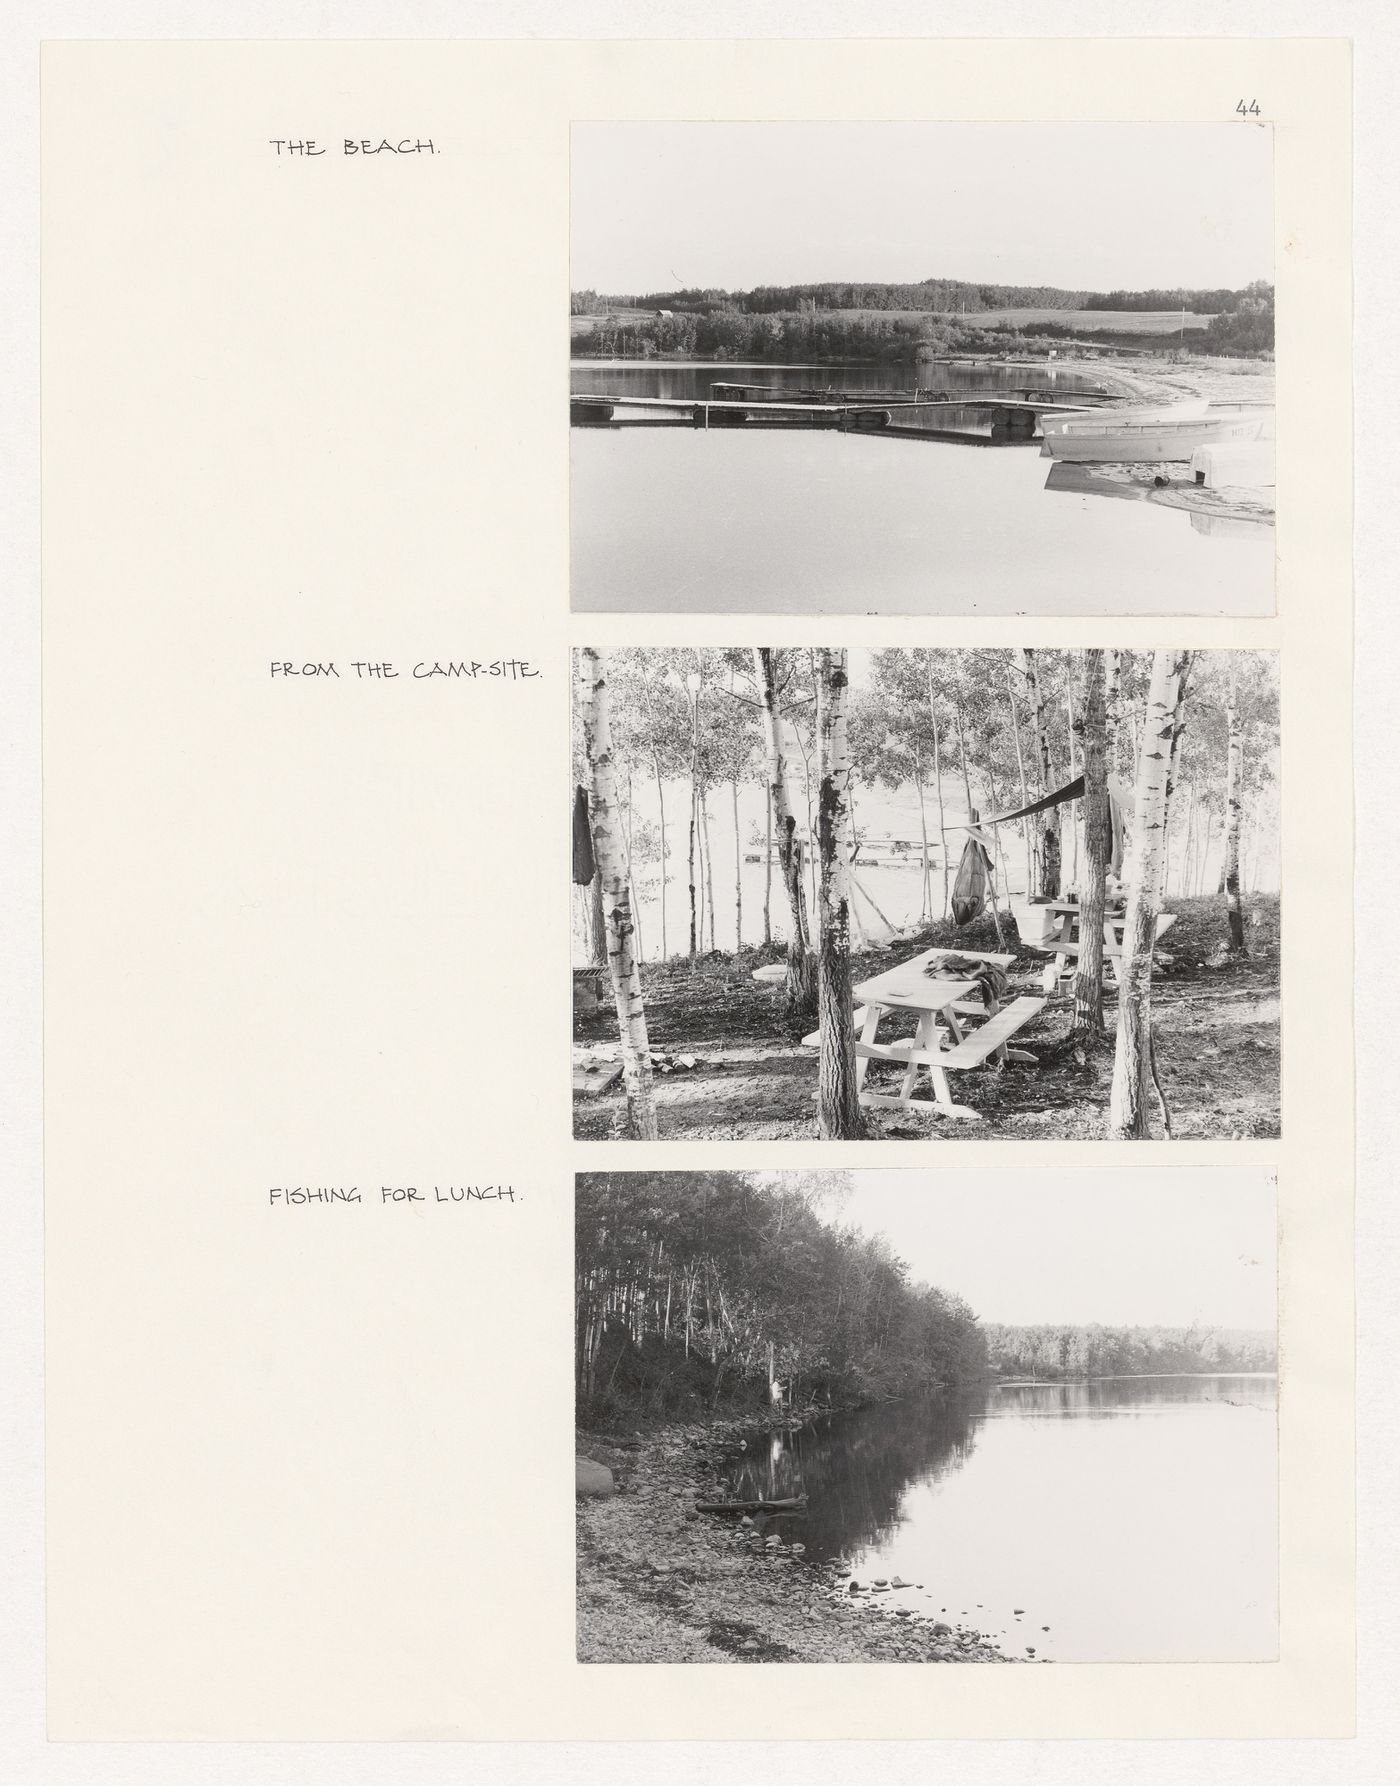 Master's thesis by J.J. Boon about building project at Saddle Lake, Alberta